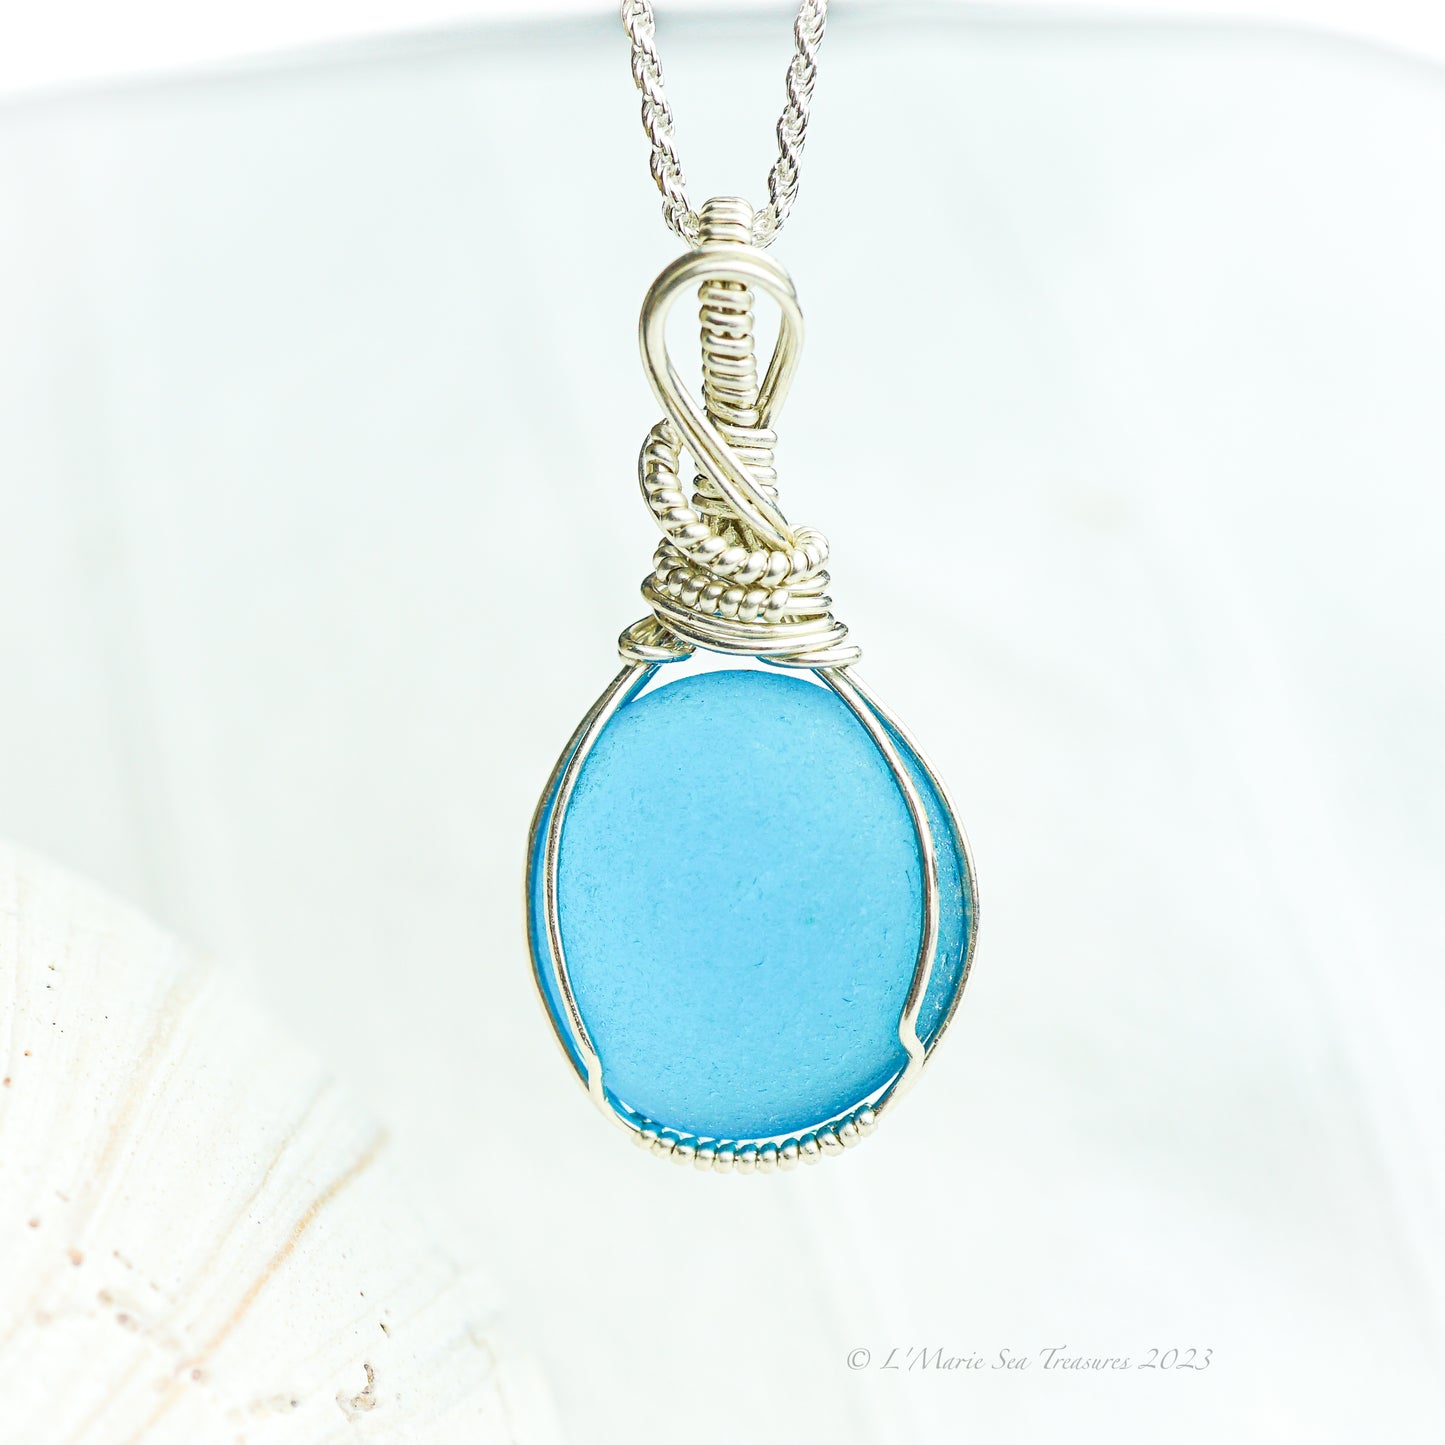 "Turquoise Stunner" Rare Sea Glass Necklace